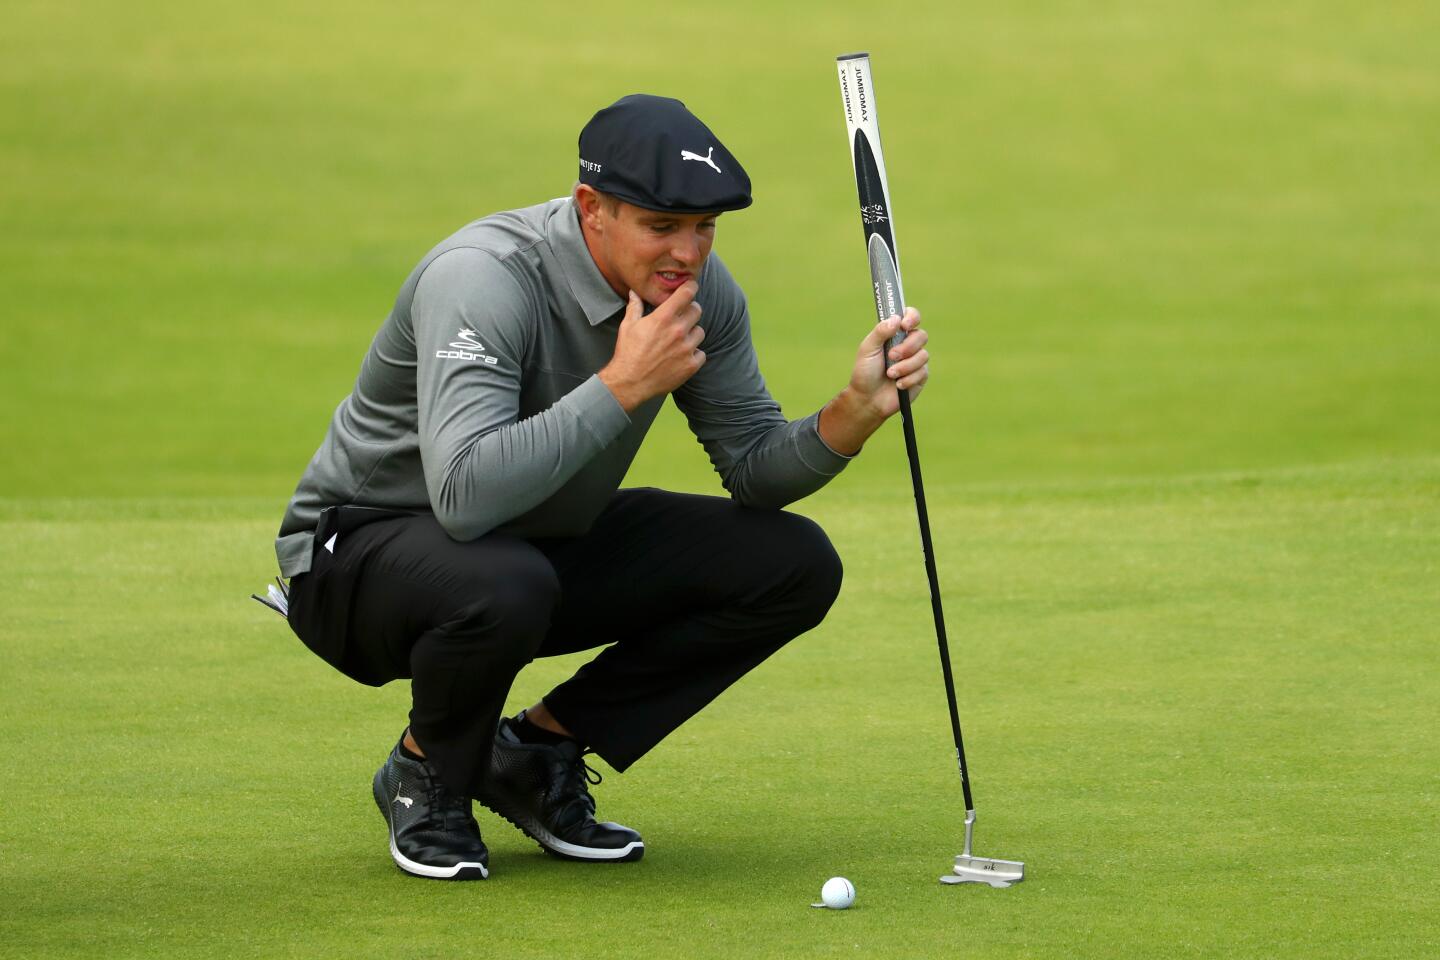 Bryson DeChambeau of the United States prepares to putt on the fourth green during the first round of the 148th Open Championship at Royal Portrush Golf Club in Northern Ireland.